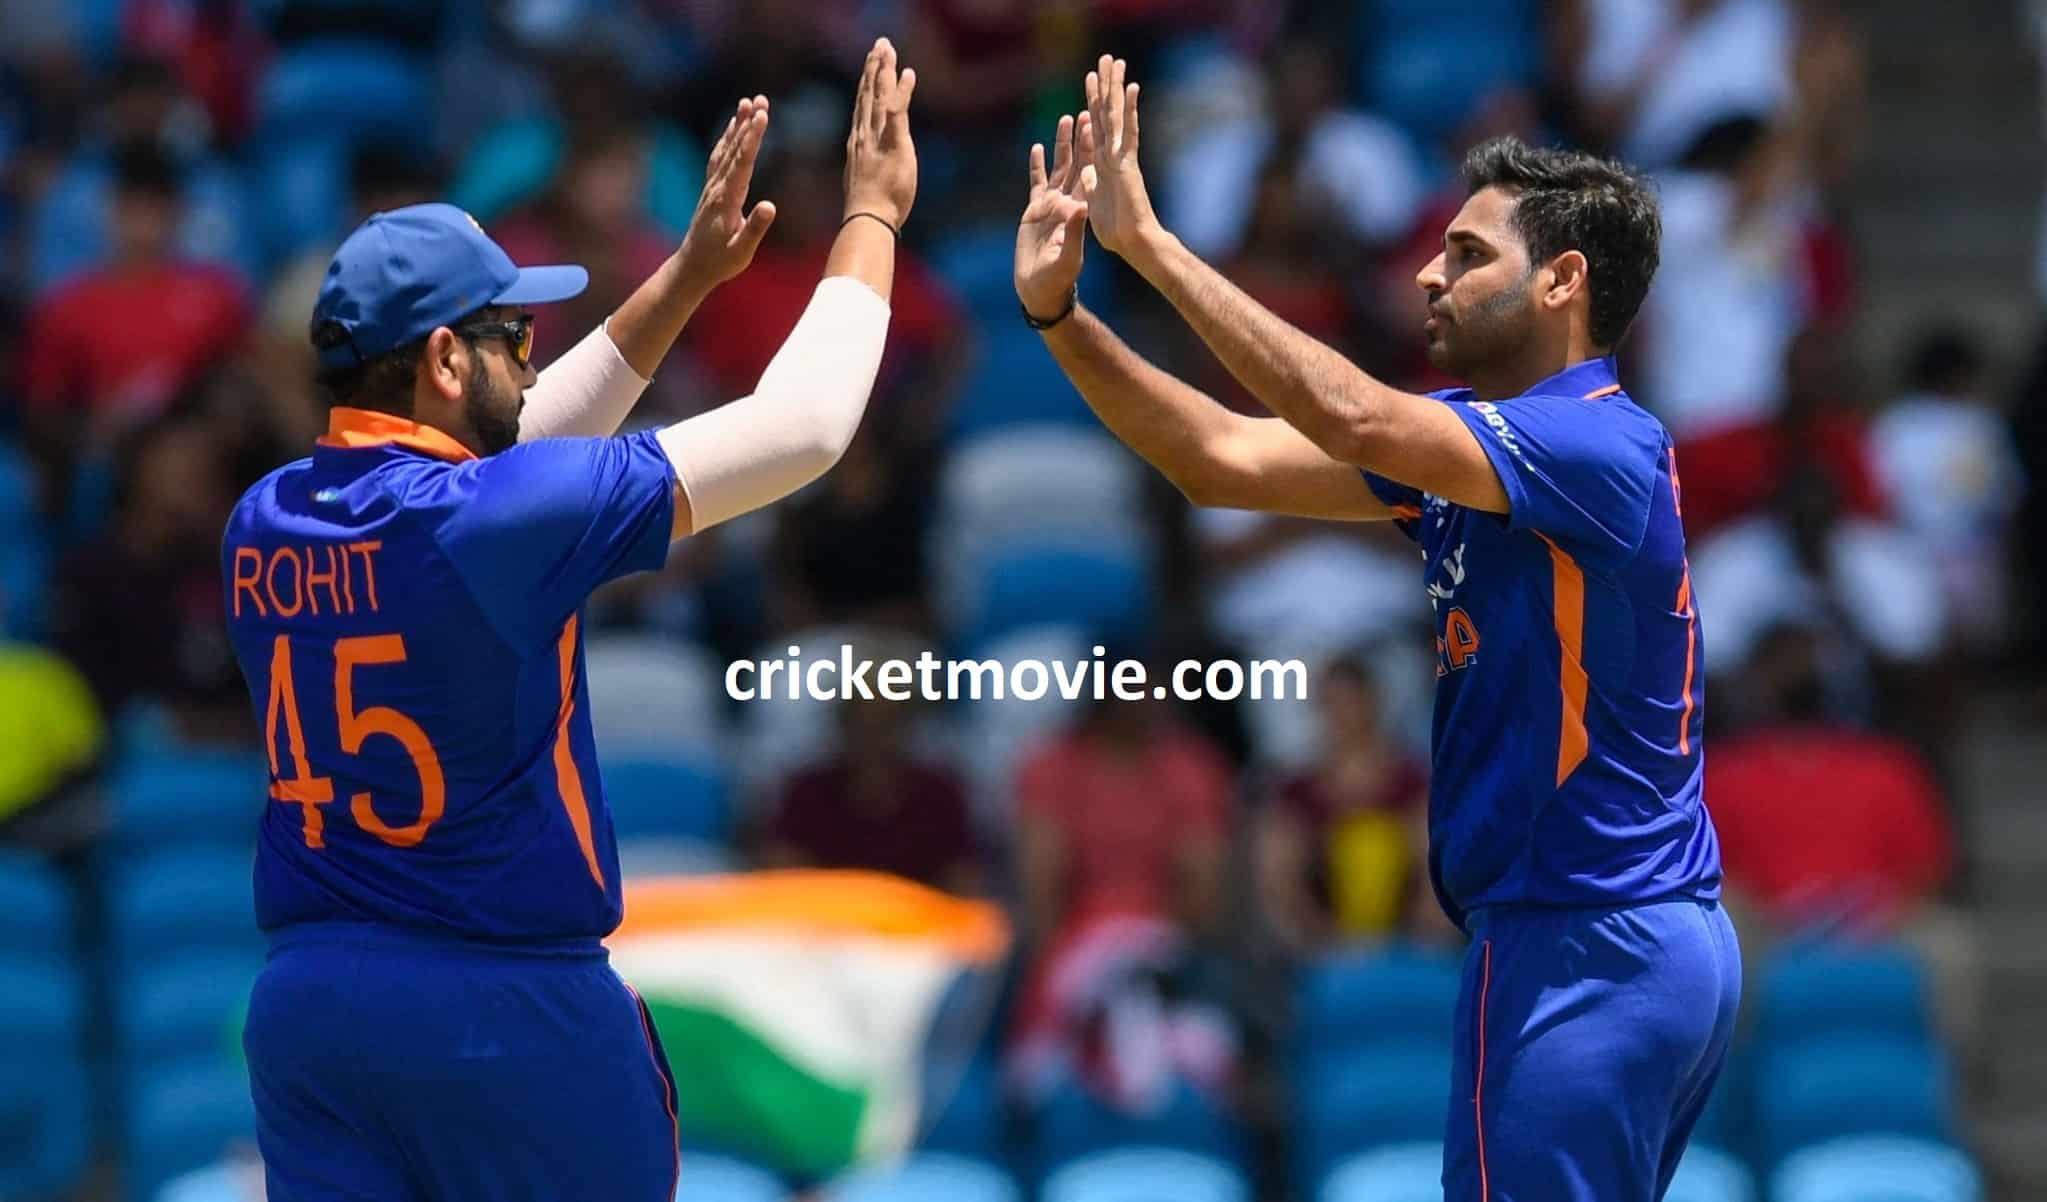 India won 3rd T20I against West Indies by 7 wickets-cricketmovie.com